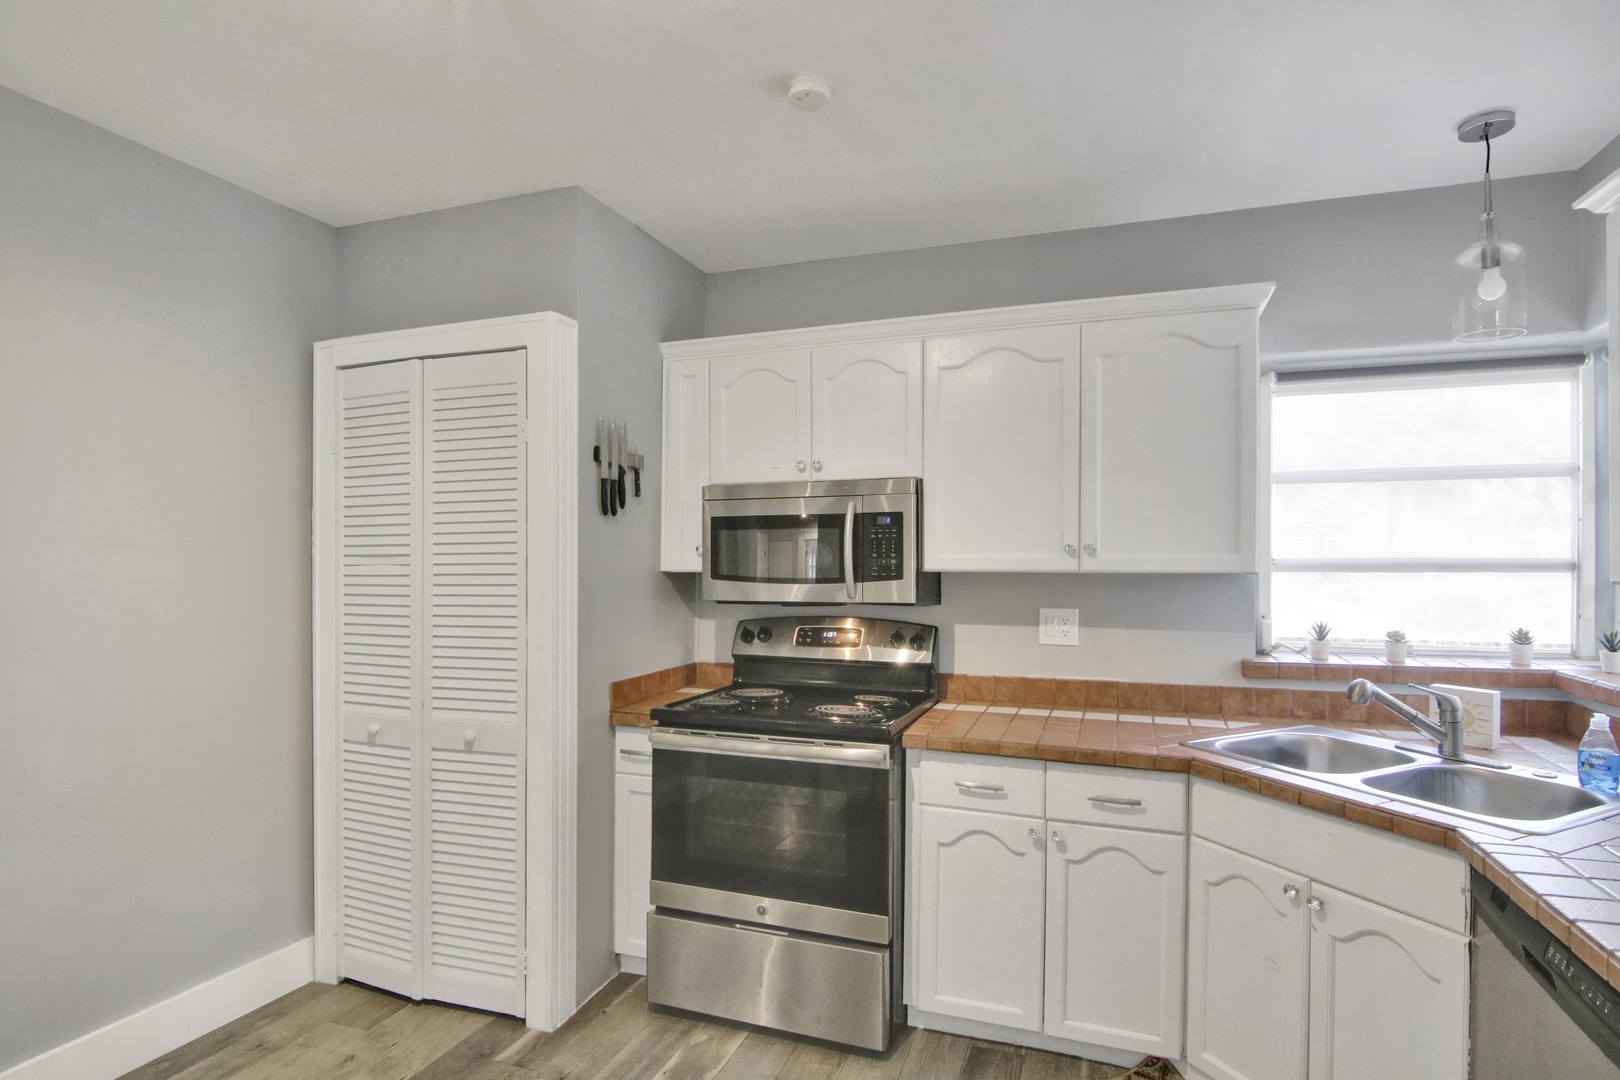 The cozy kitchen offers ample space & all the comforts of home